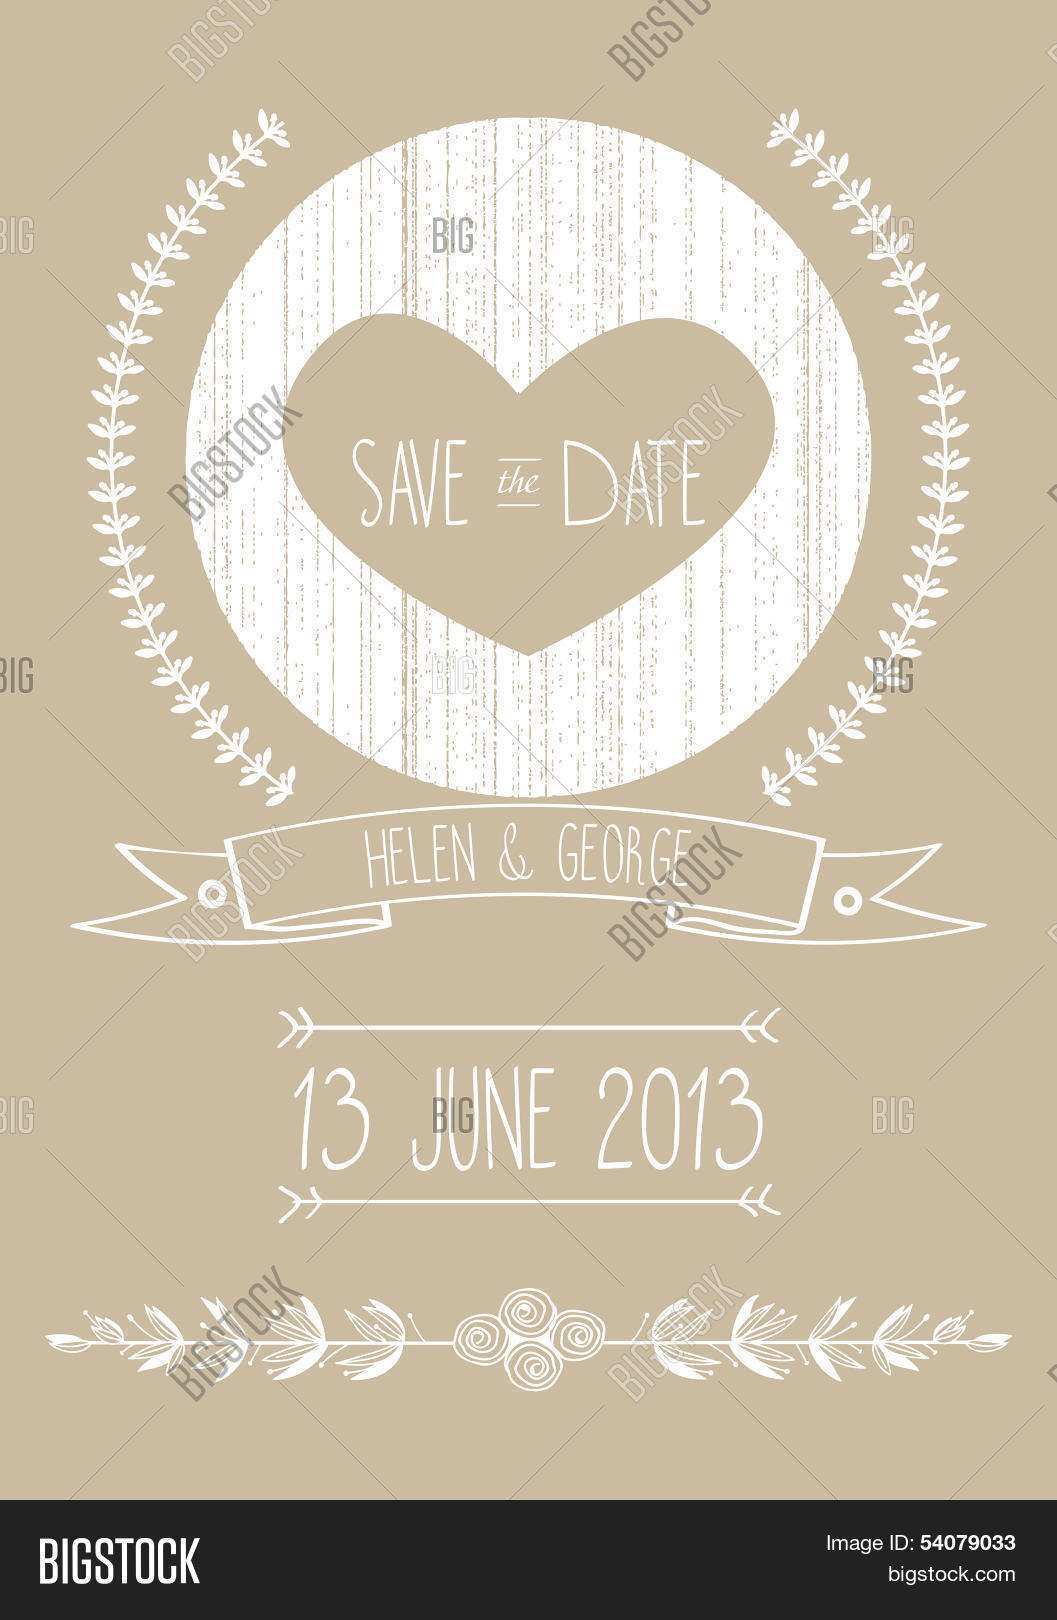 81 Free Save The Date Wedding Invitation Template Vector Photo by Save The Date Wedding Invitation Template Vector